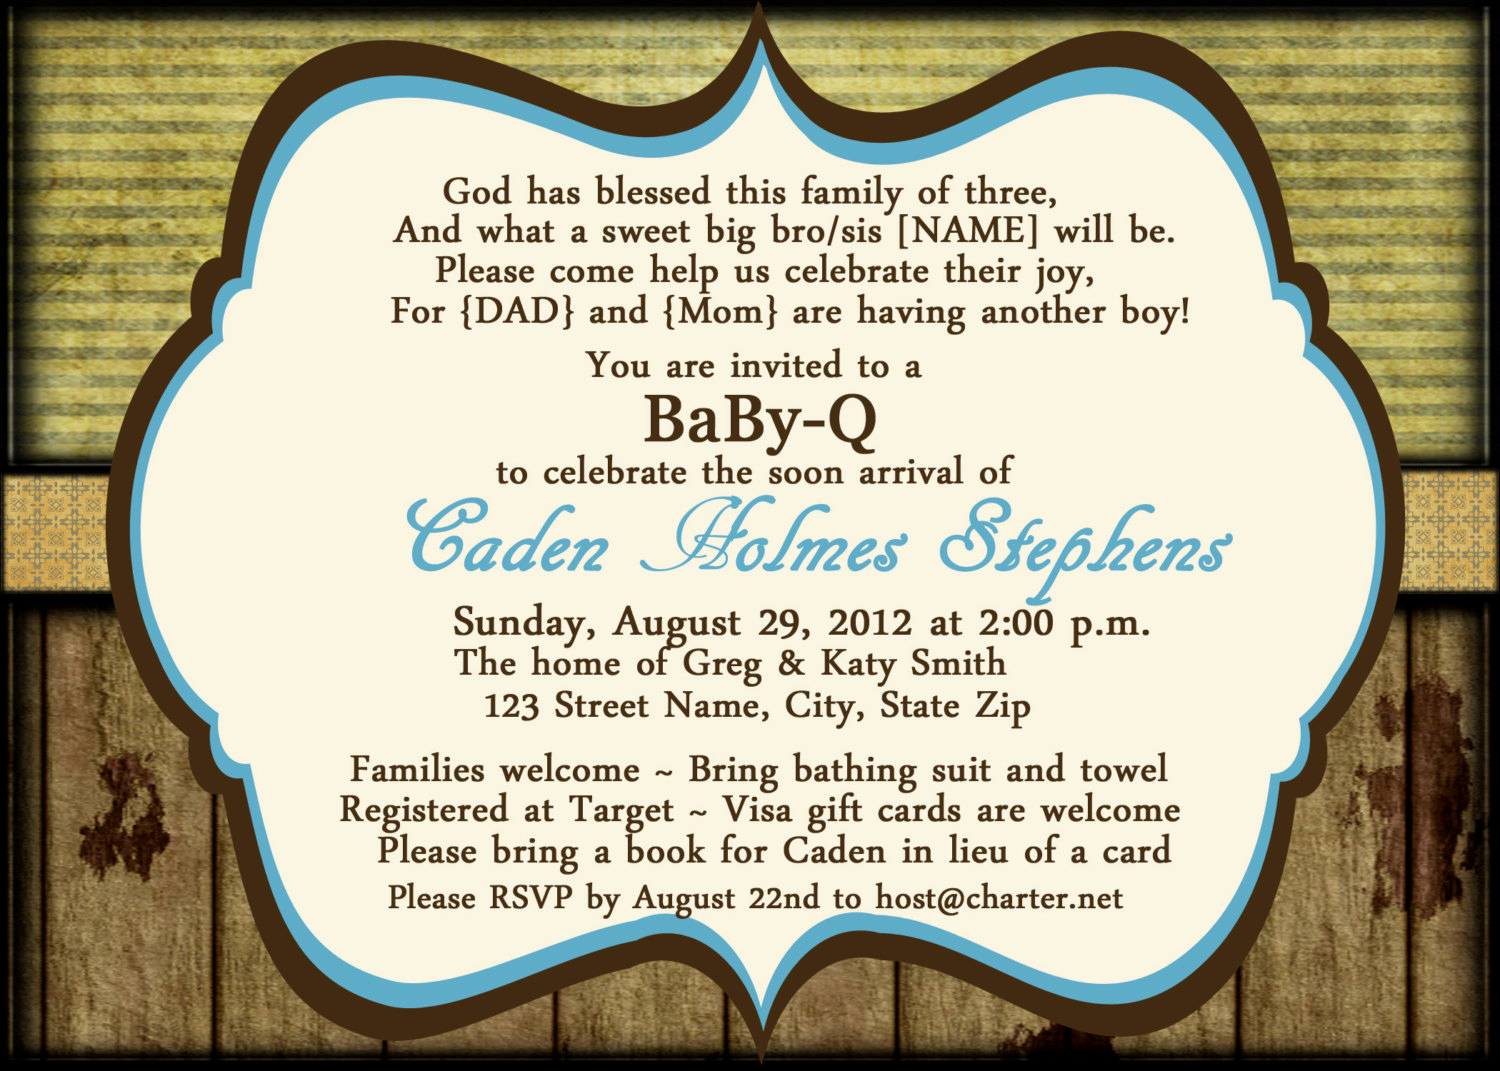 Baby Shower Invitation Example Beautiful Baby Q Invitation or Barbeque Invitation by Rae721 On Etsy